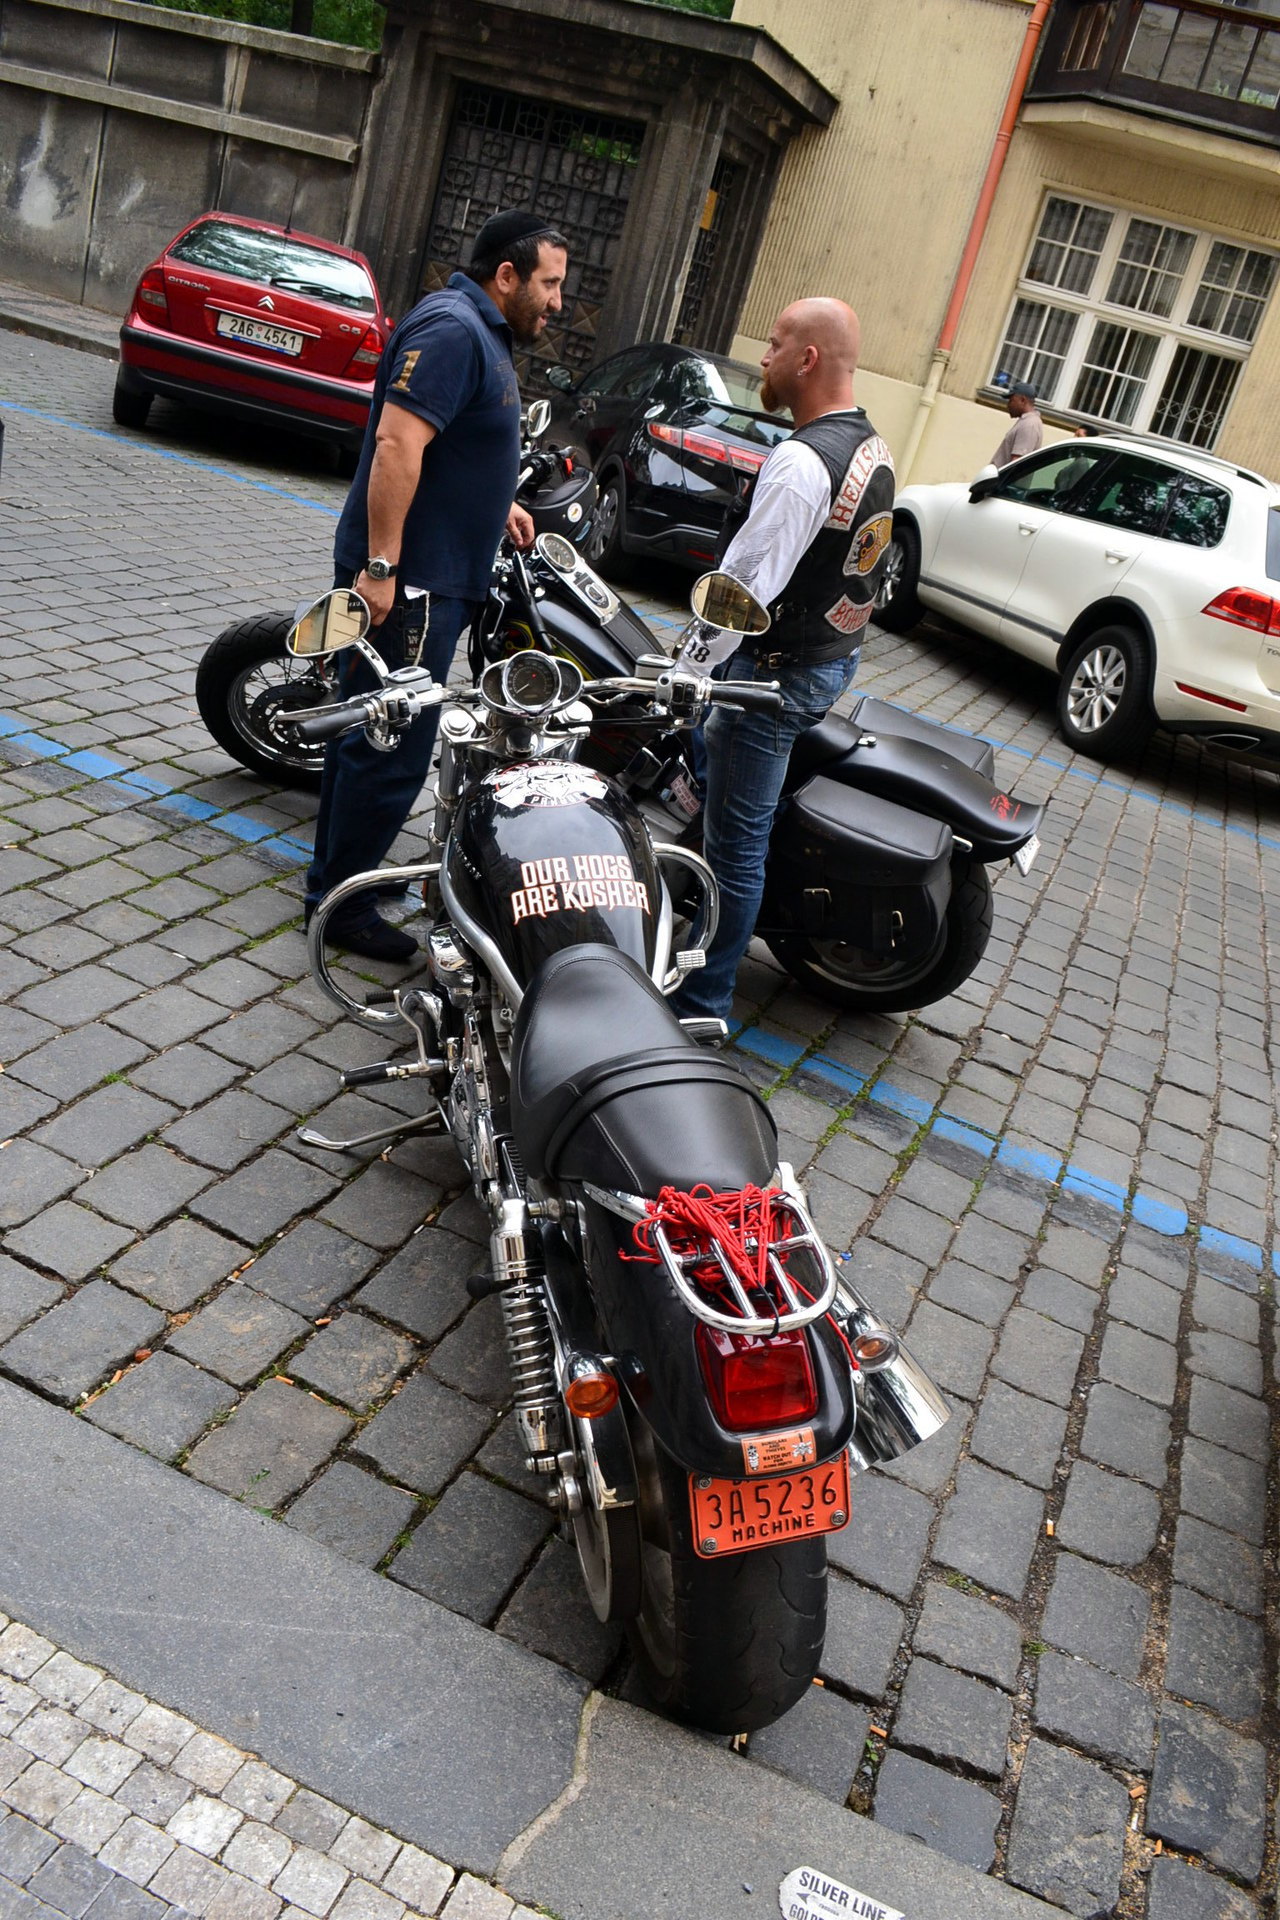 Okay, so this photo was not in fact taken in Israel, but that’s what makes it all the more interesting…
I was in Prague a few weeks ago traveling and visiting a friend when I came upon a pretty photo-worthy situation. In this photo are two motorcycle...